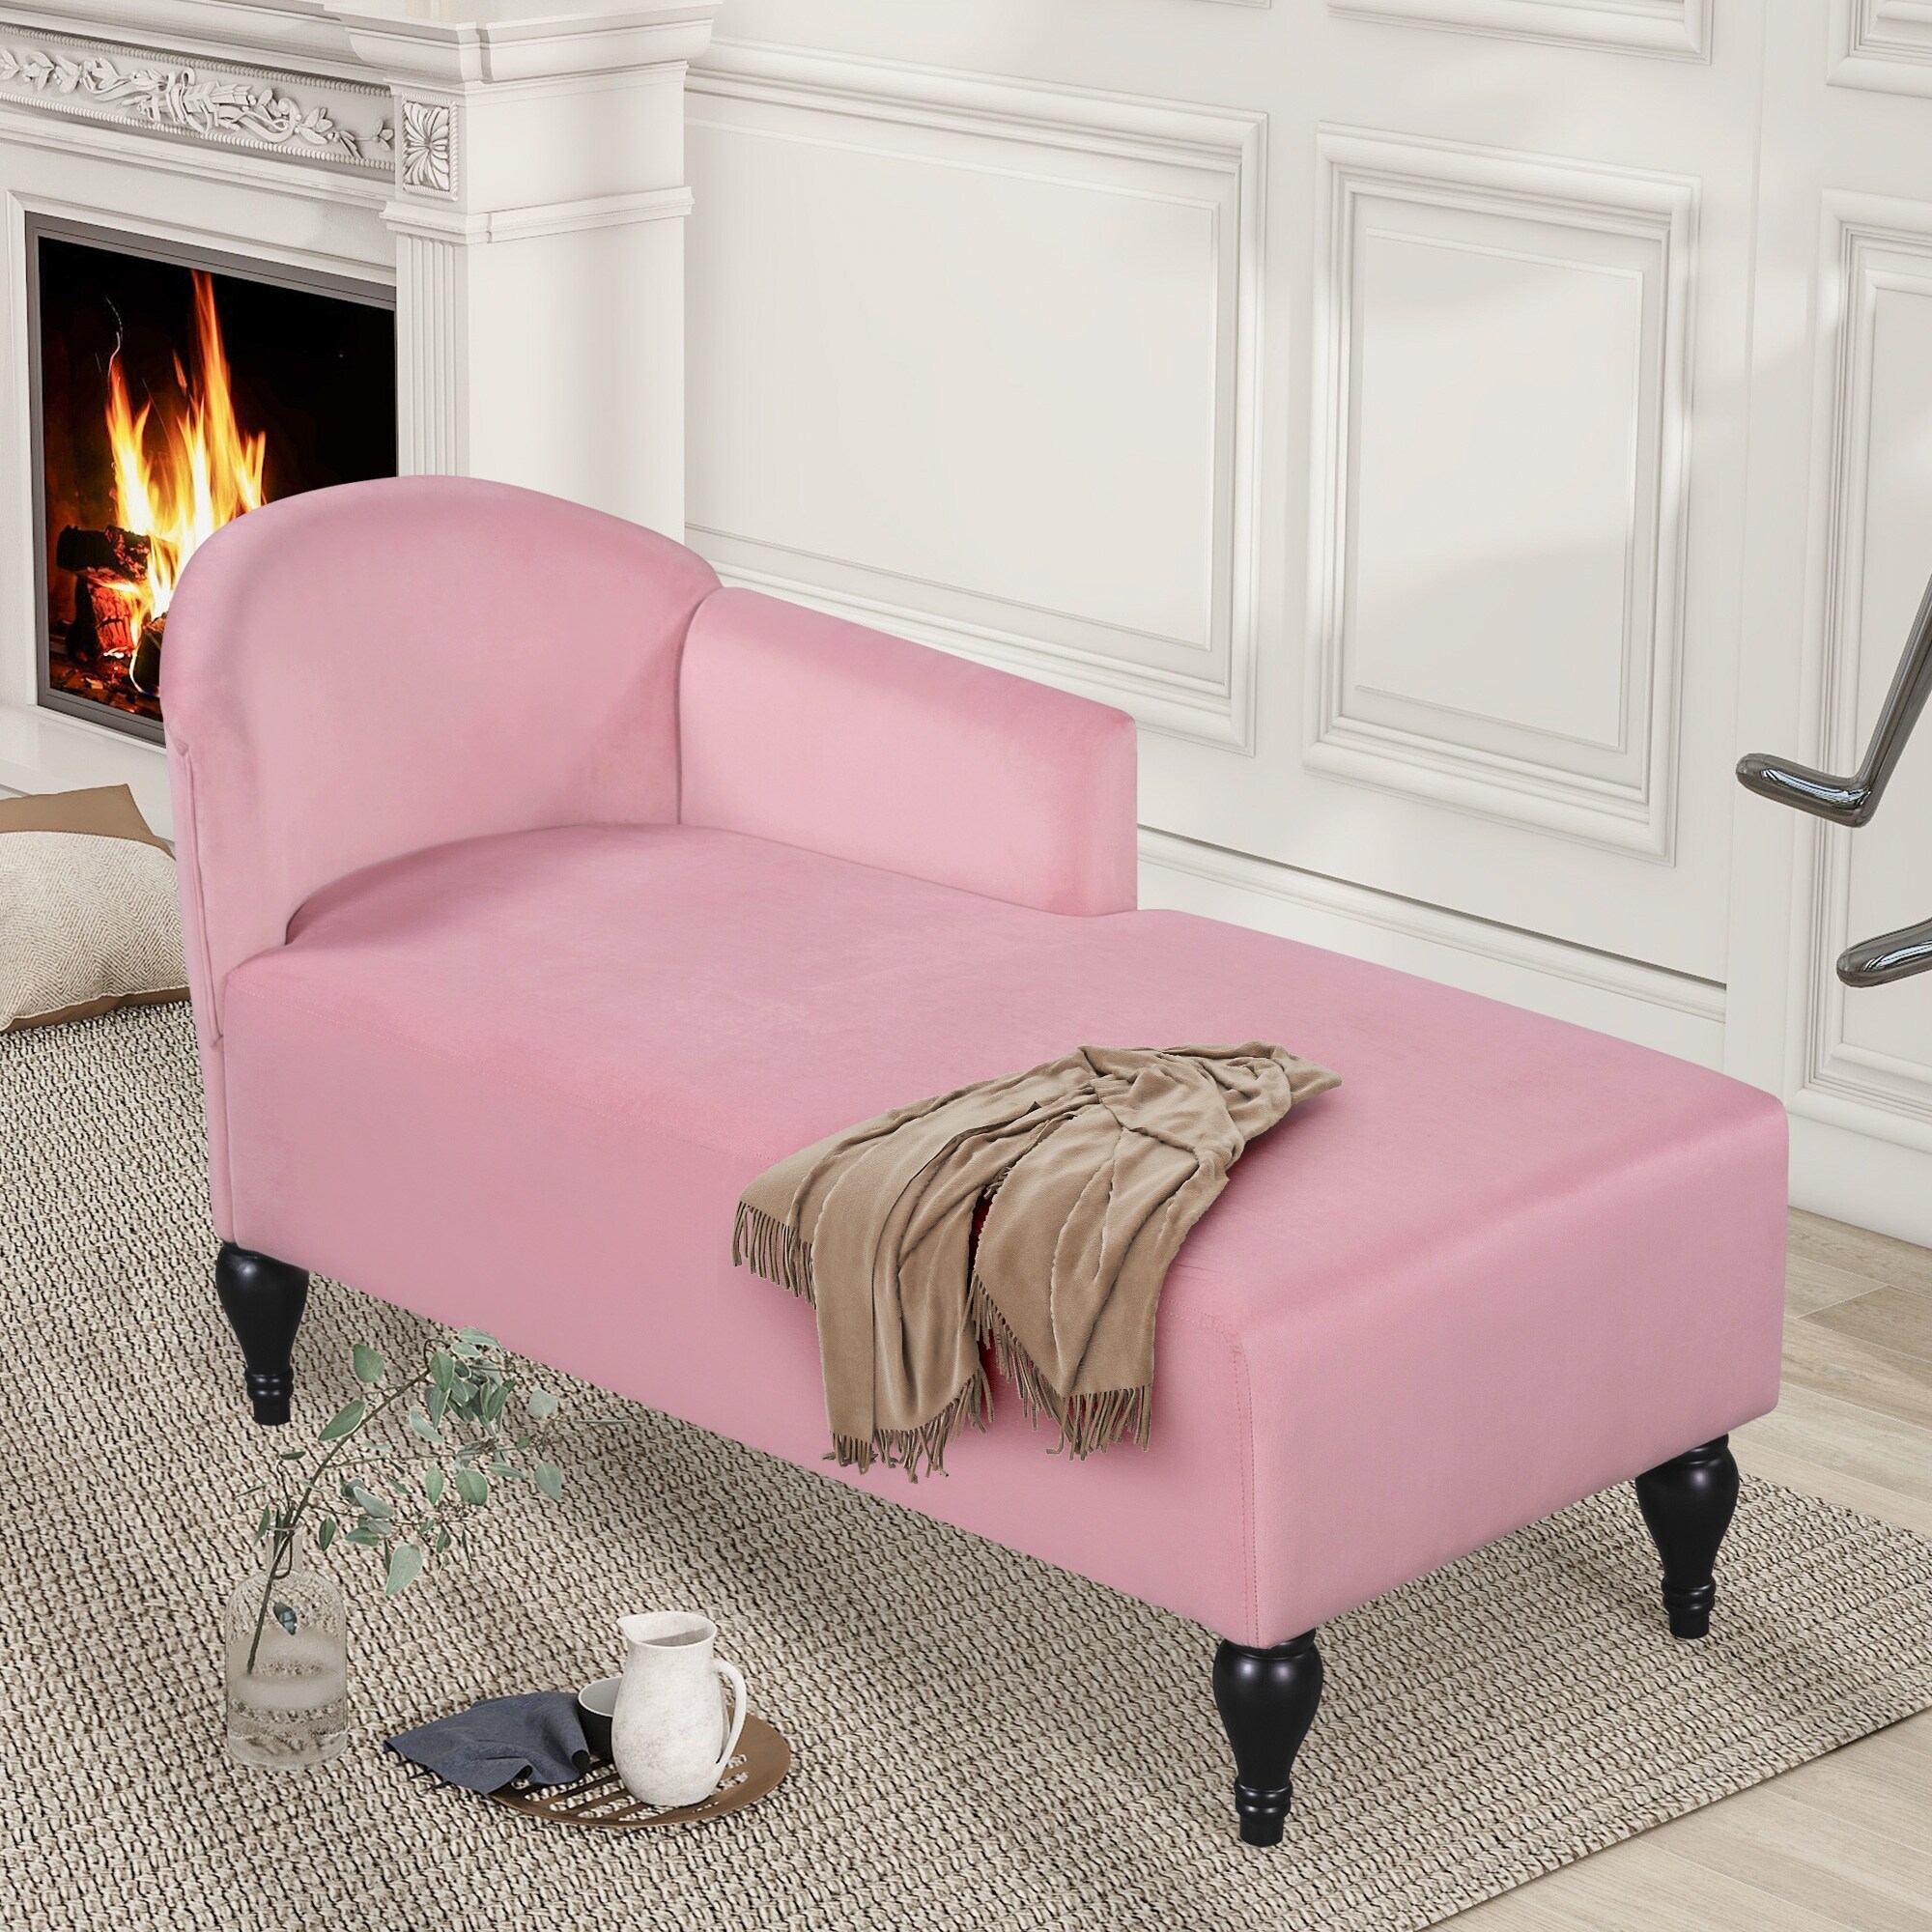 Velvet Chaise Lounge With Nailhead Trim and Solid Wood Legs